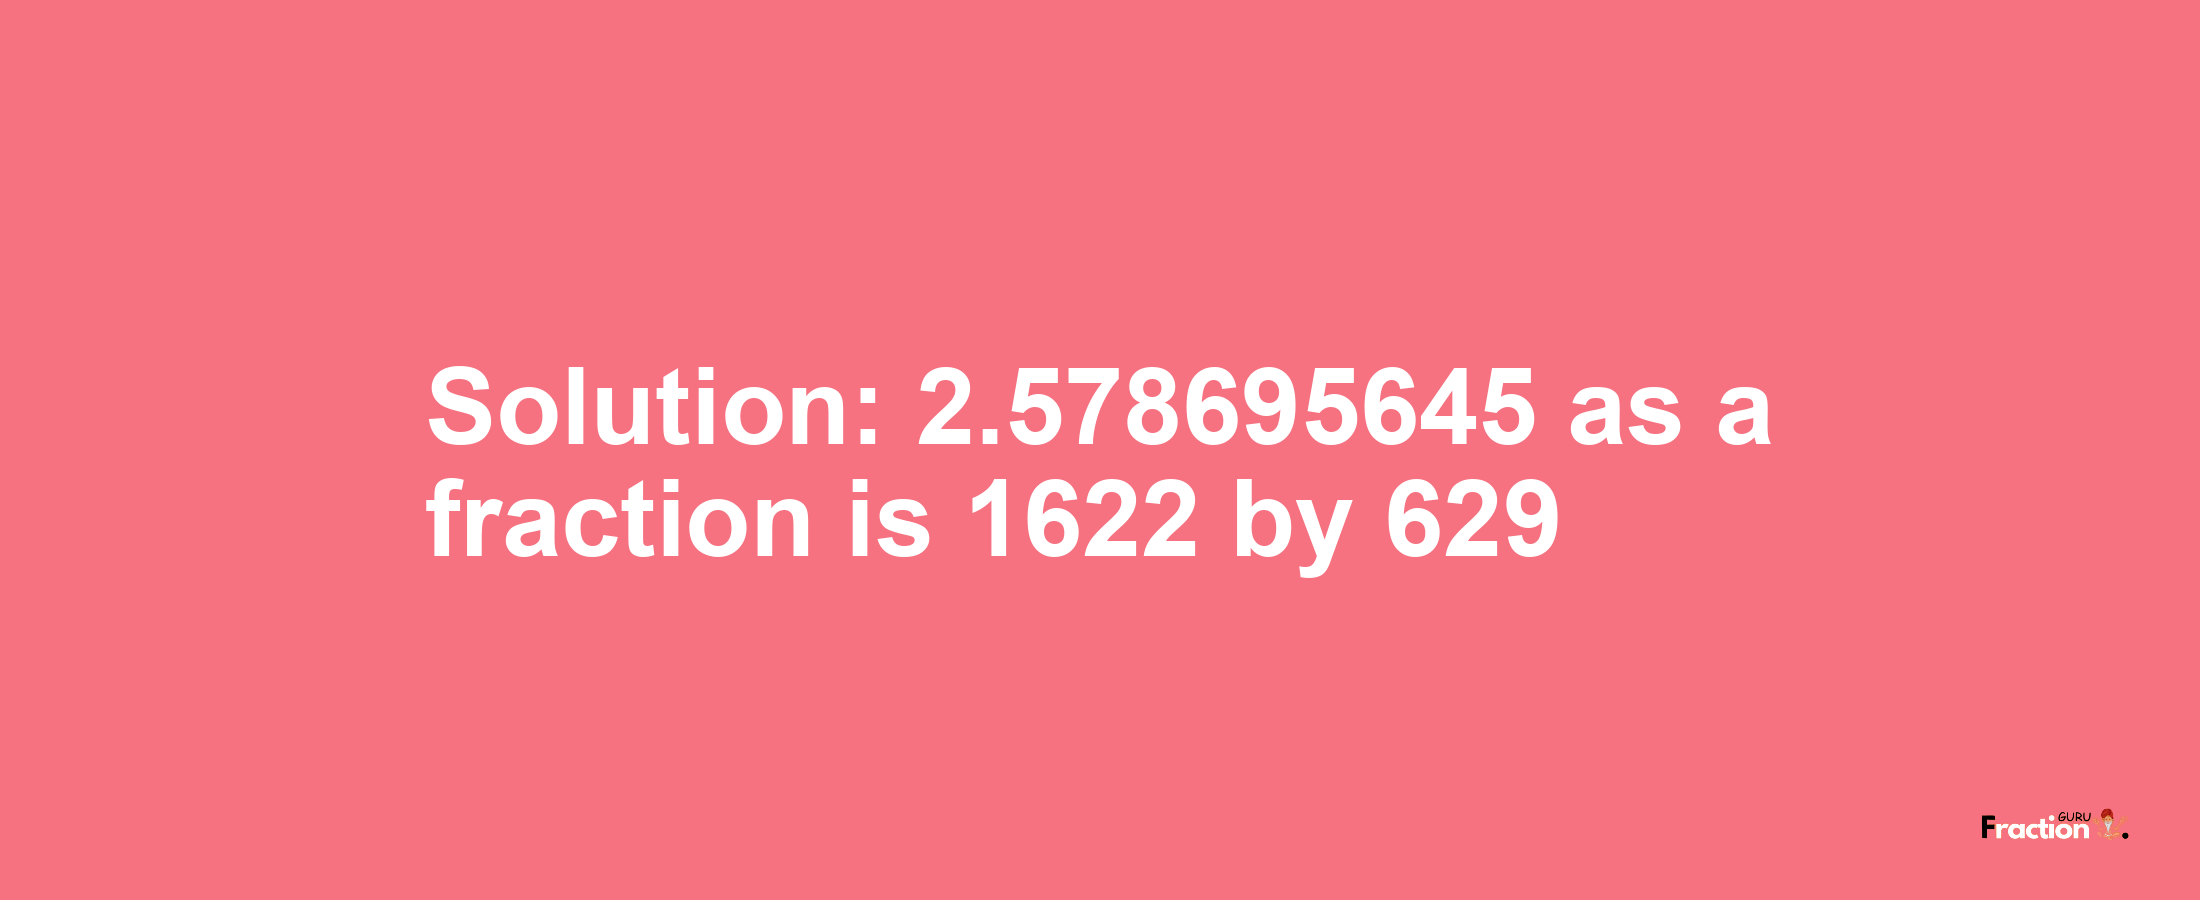 Solution:2.578695645 as a fraction is 1622/629